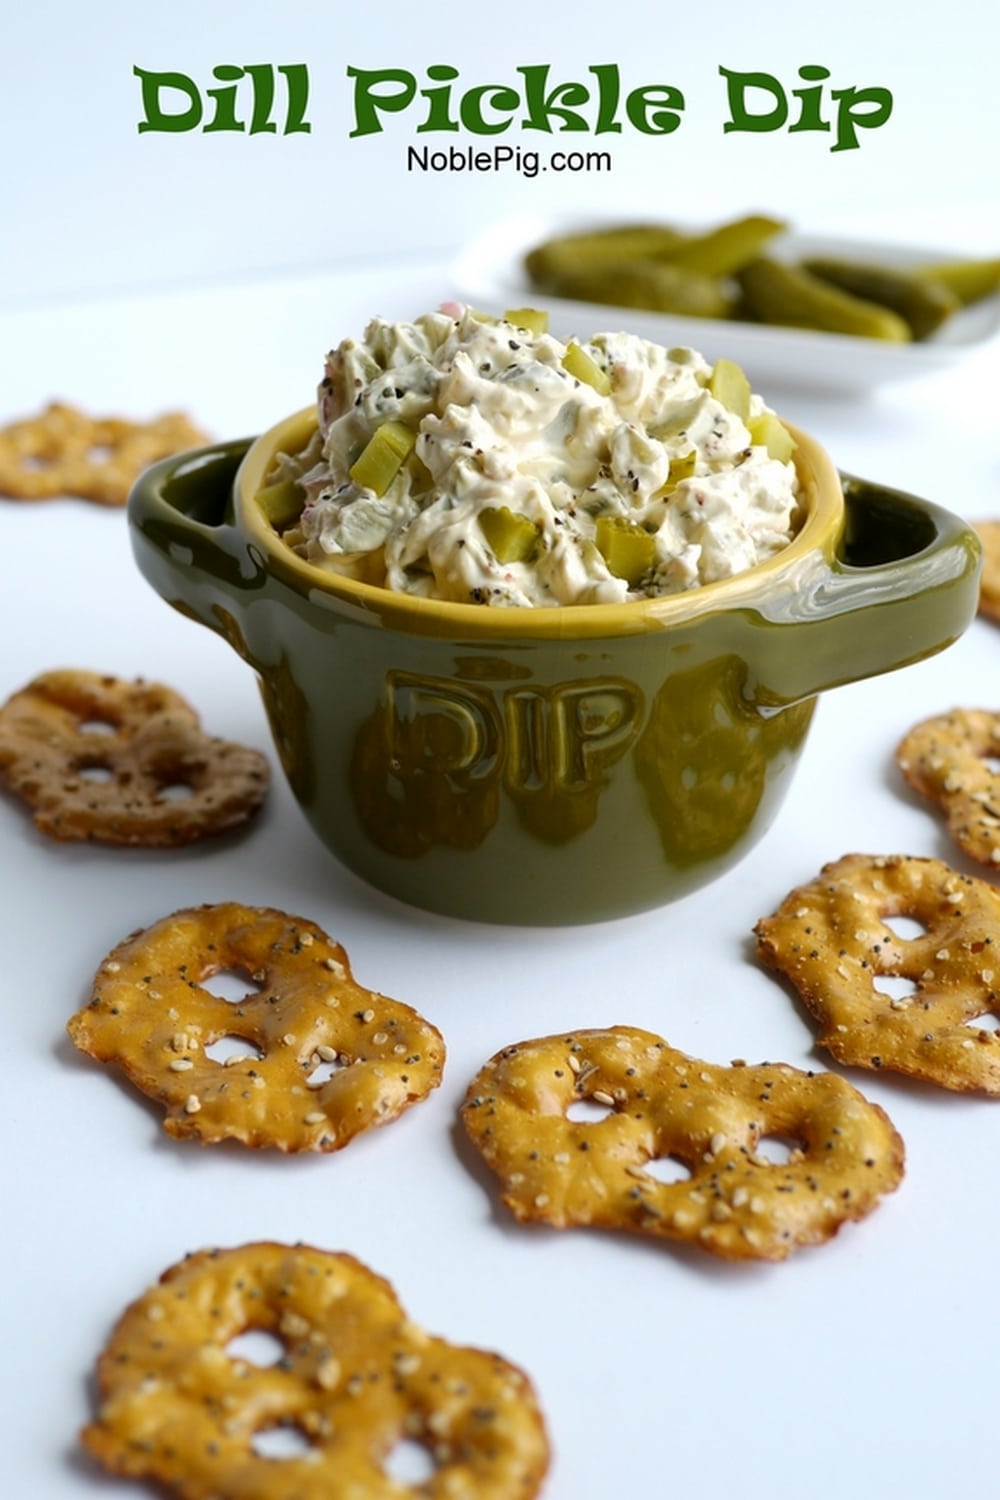 This Dill Pickle Dip is a crowd-pleasing cream cheese dill pickle dip loaded with flavor, ideal for your next get-together. The secret ingredient I use is what makes this chip dip stand out as the best! You must be a pickle lover to really embrace this fun and tasty appetizer dip recipe. via @cmpollak1